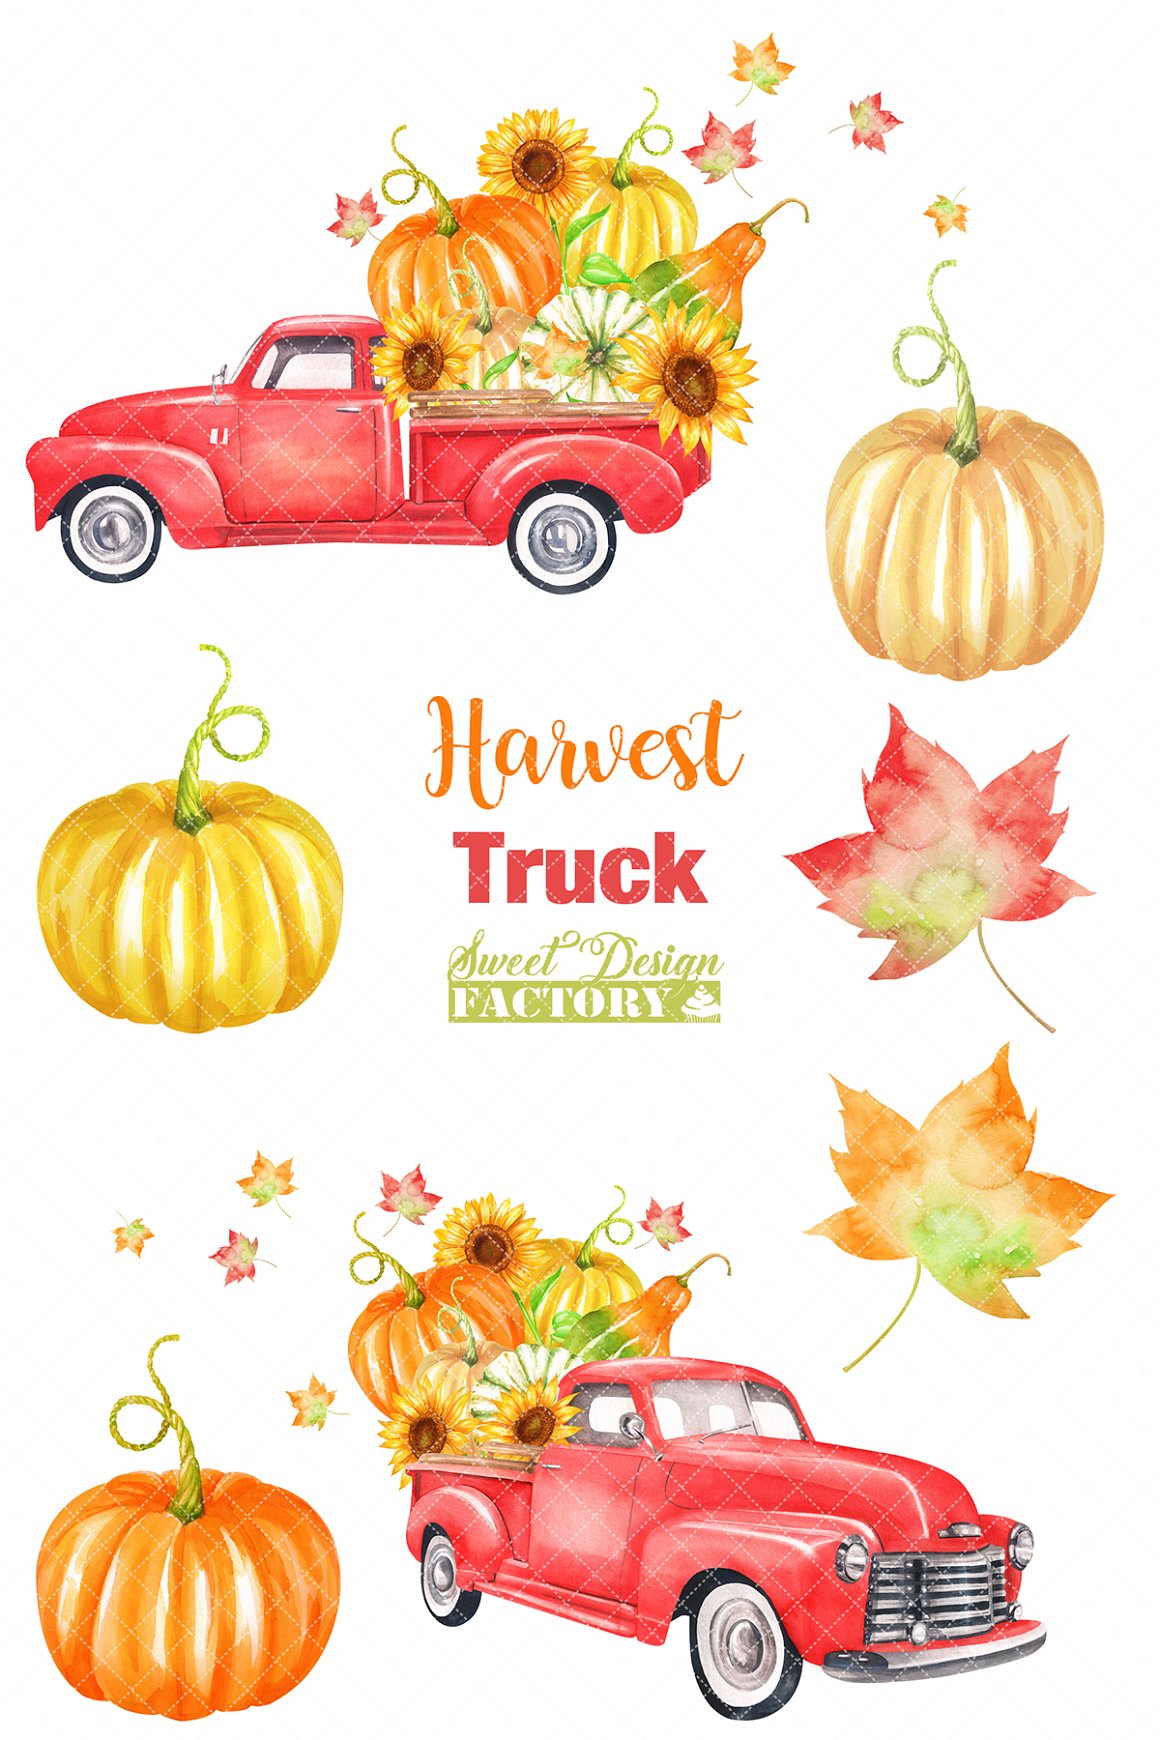 Cars with pumpkins and pumpkins on the autumn theme.